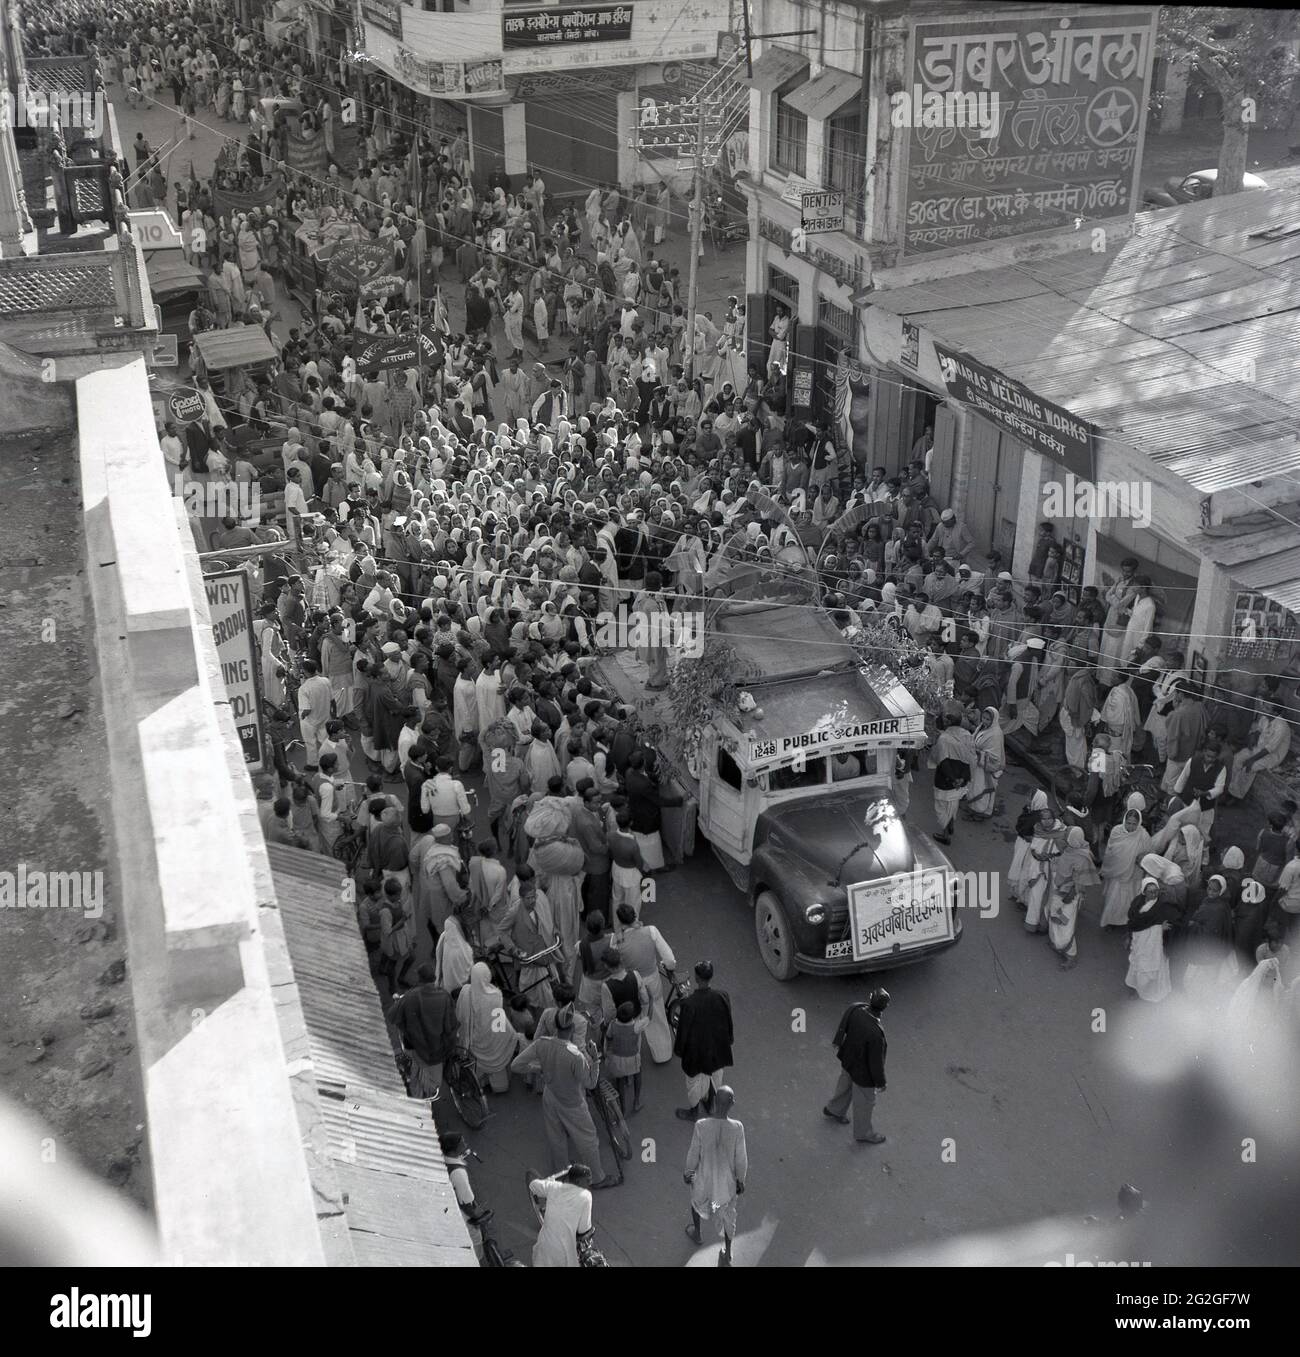 1950s, historical, overhead view of a crowd  of people gathering in a street surrounding an open-ended indian 'public carrier' truck carrying a religious artifact, Benares, India. Stock Photo